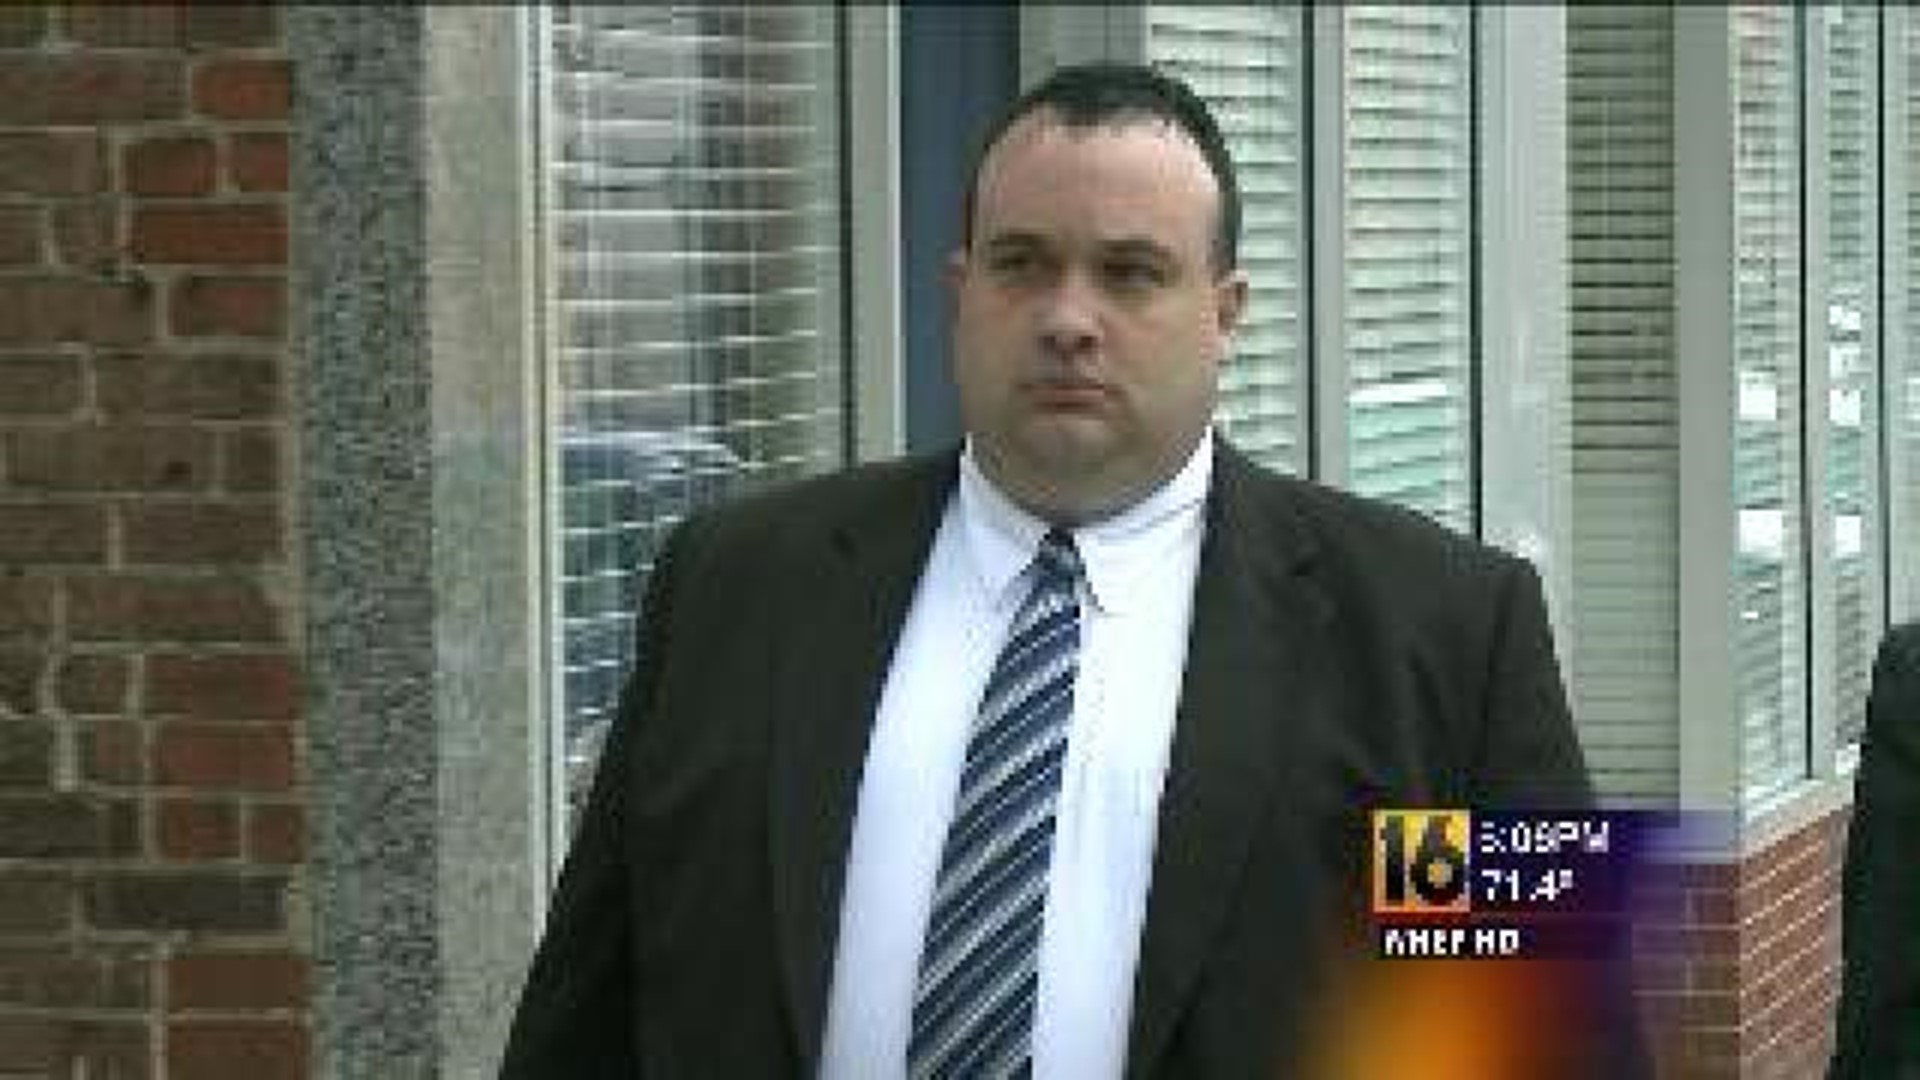 Fire Company President Charged for Stealing Thousands